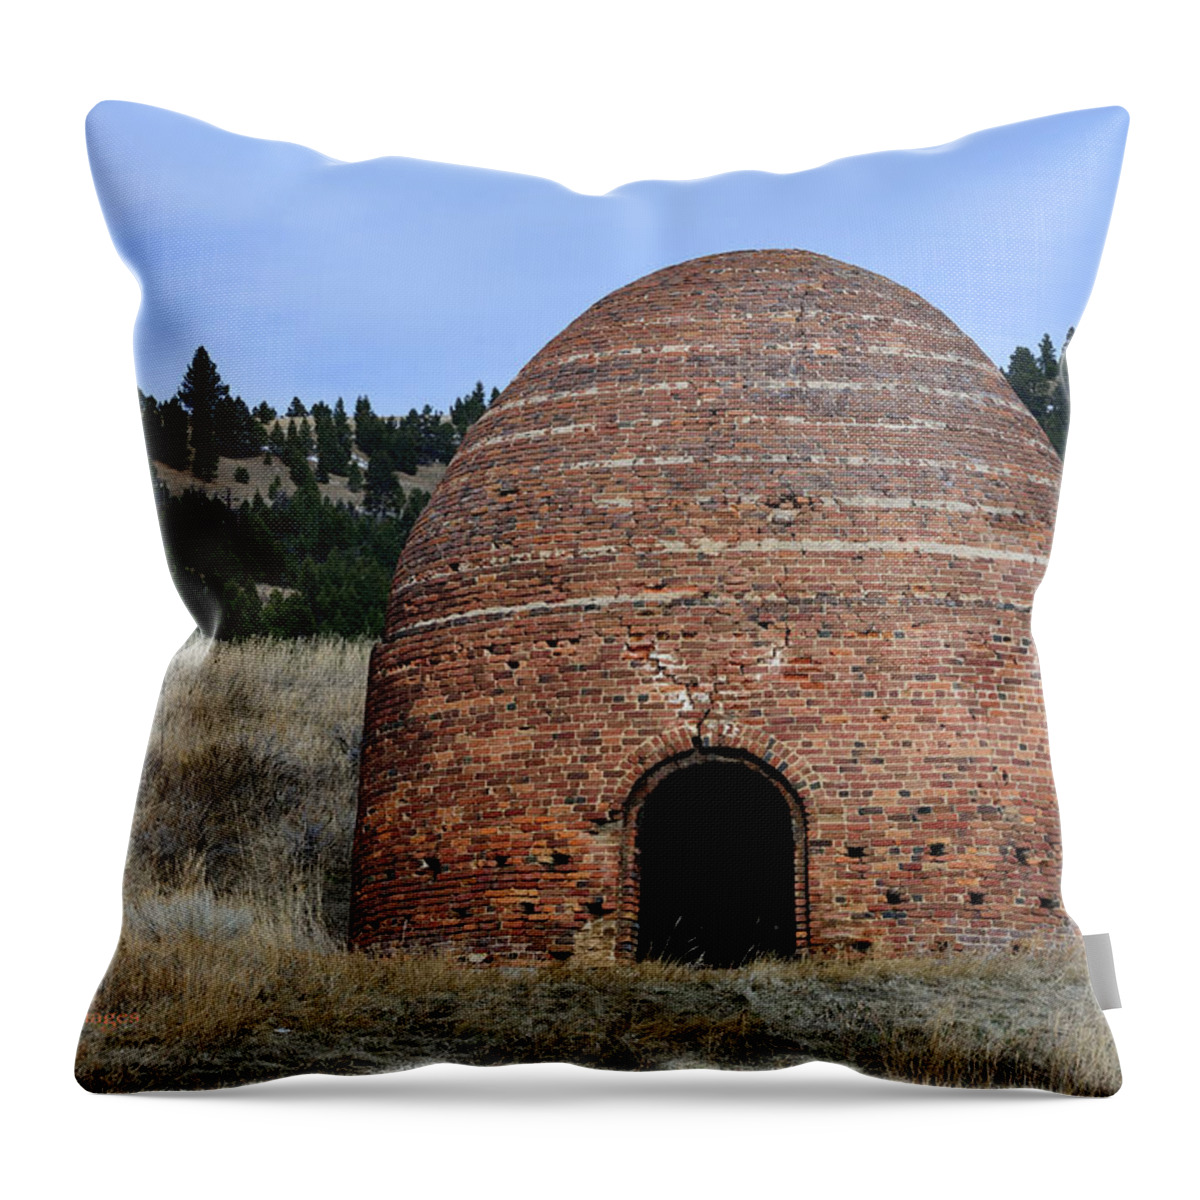 Furnace Throw Pillow featuring the photograph Old Beehive Furnace by Kae Cheatham